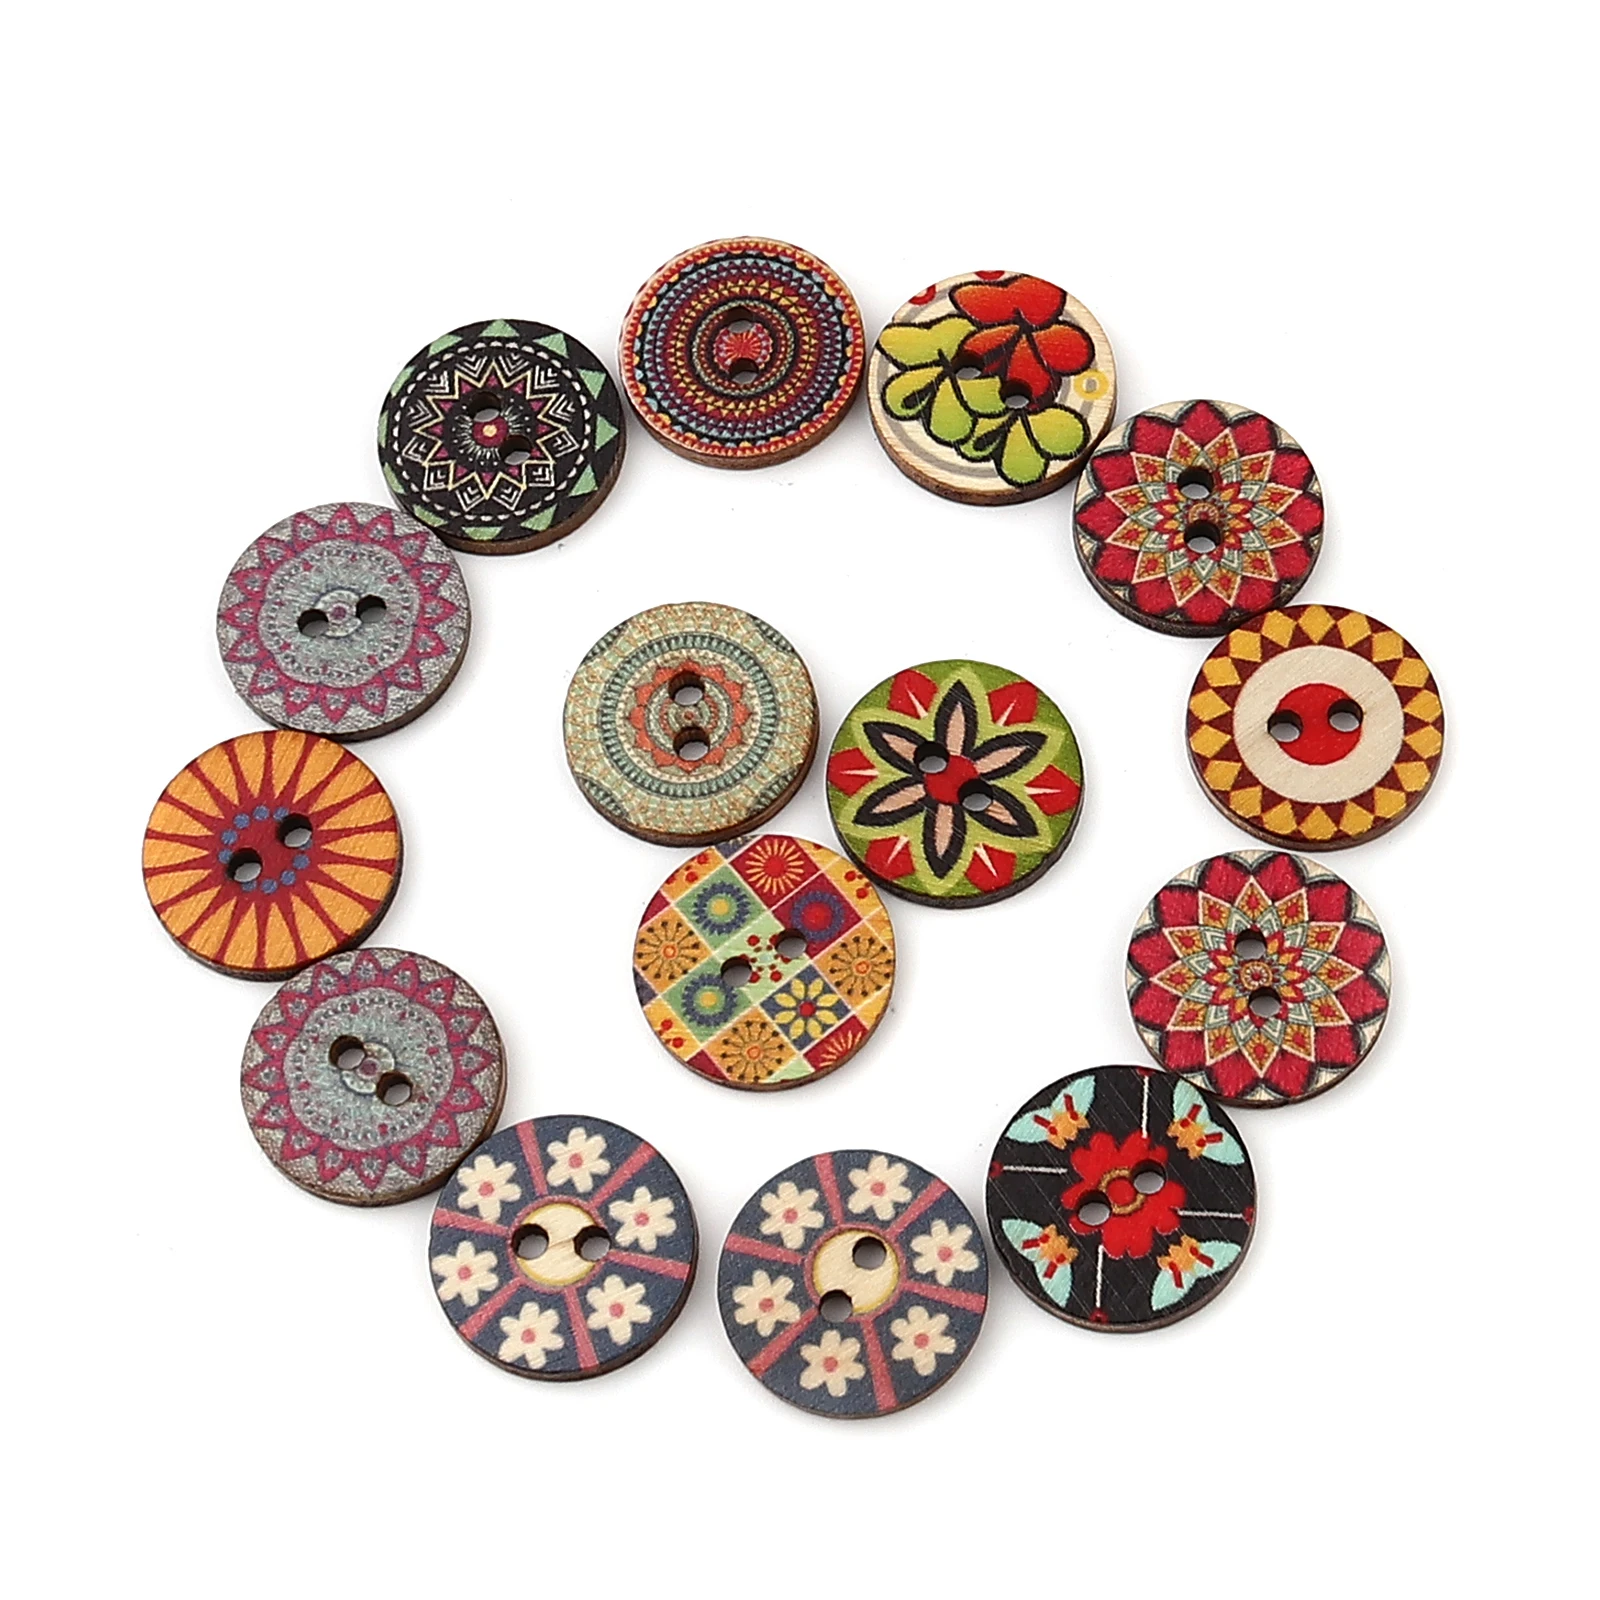 100 PCs 20mm 25mm Dia. Wood Buddhism Mandala Sewing Buttons Scrapbooking Two Holes Round Multicolor Flower  For DIY Craft Making